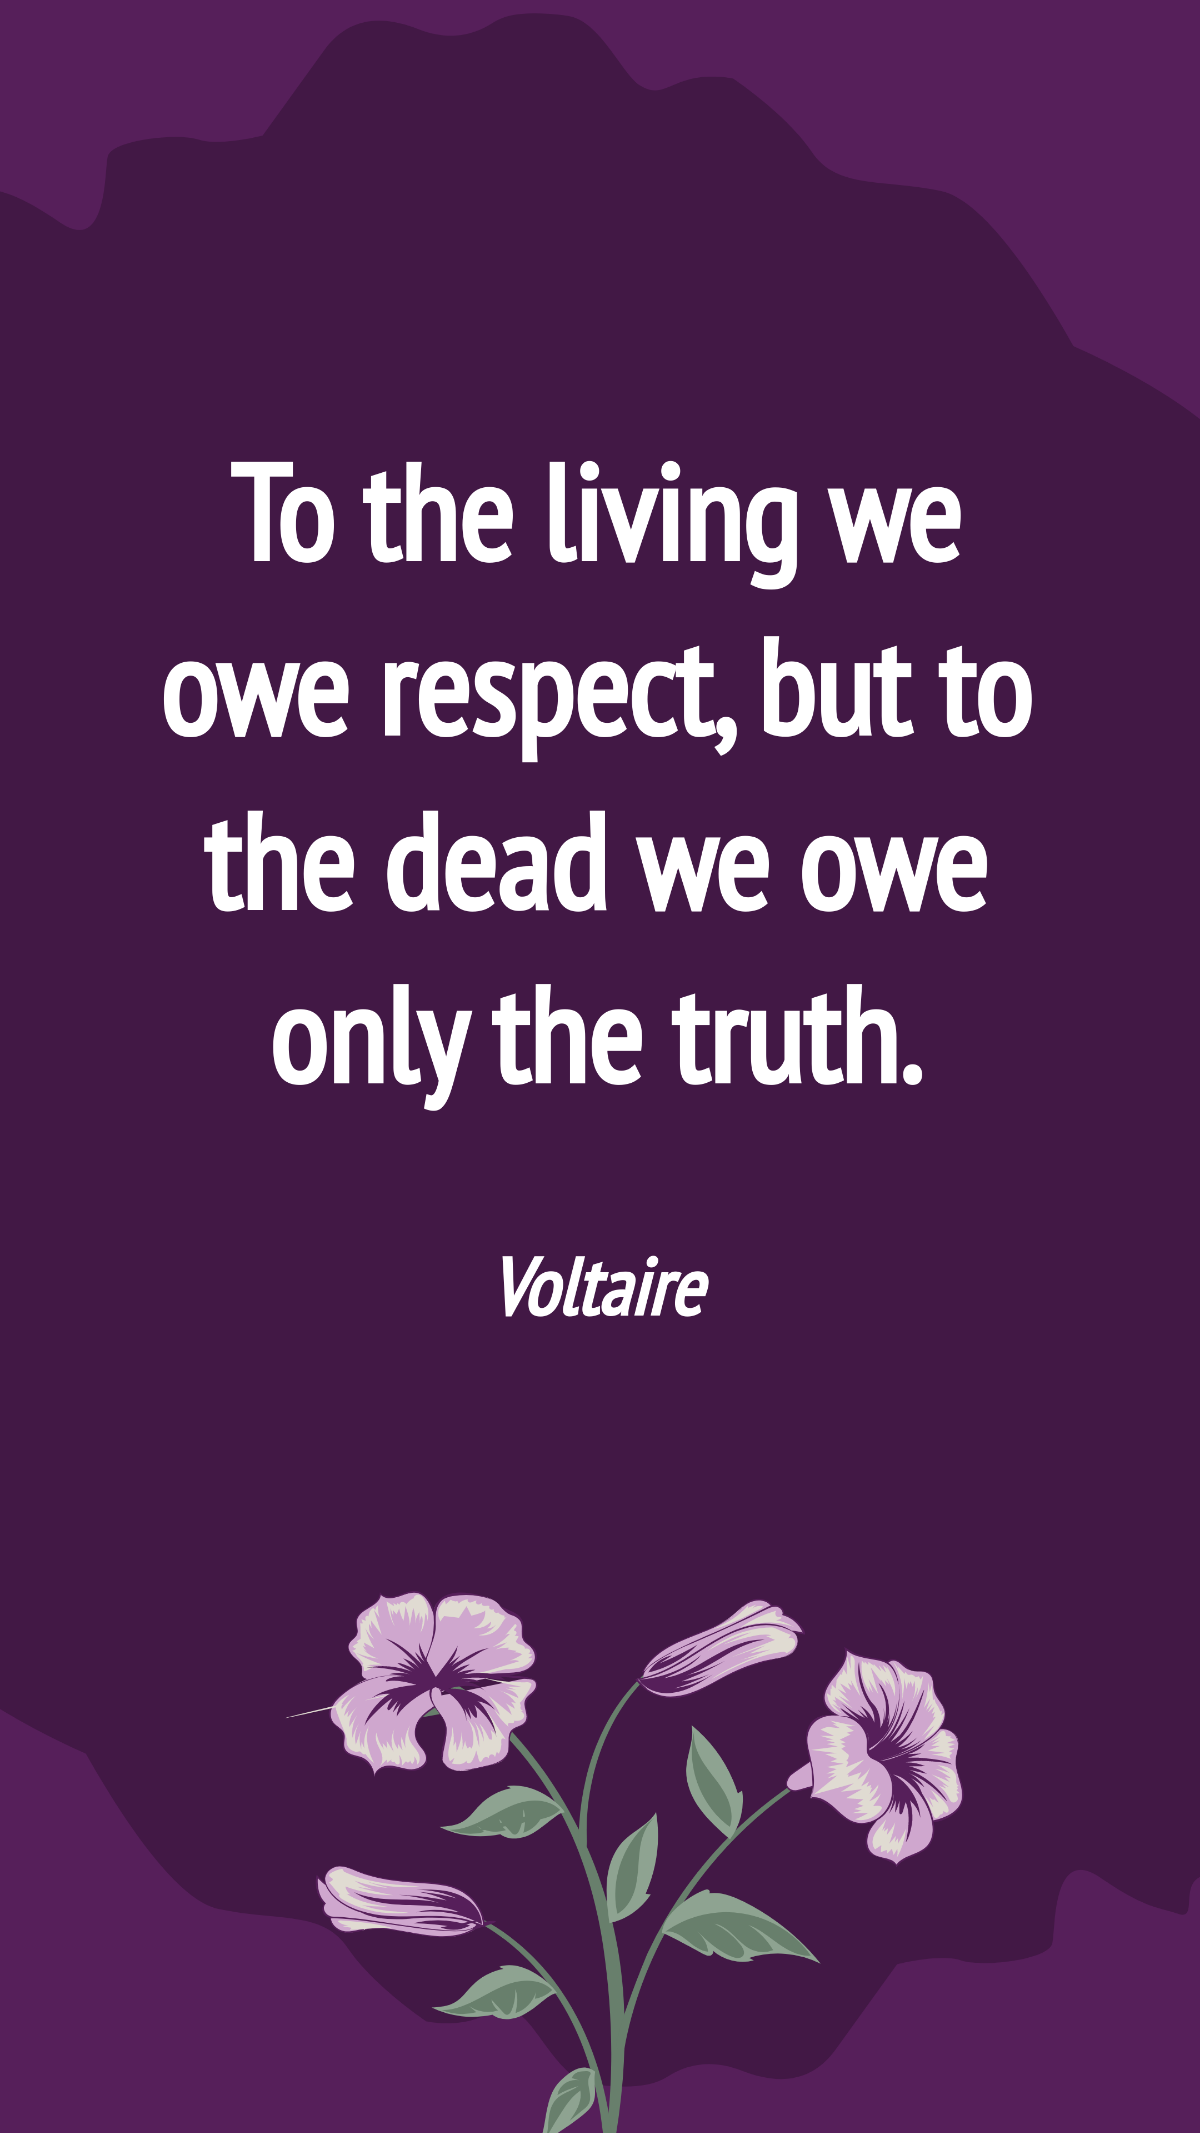 Voltaire - To the living we owe respect, but to the dead we owe only the truth. Template